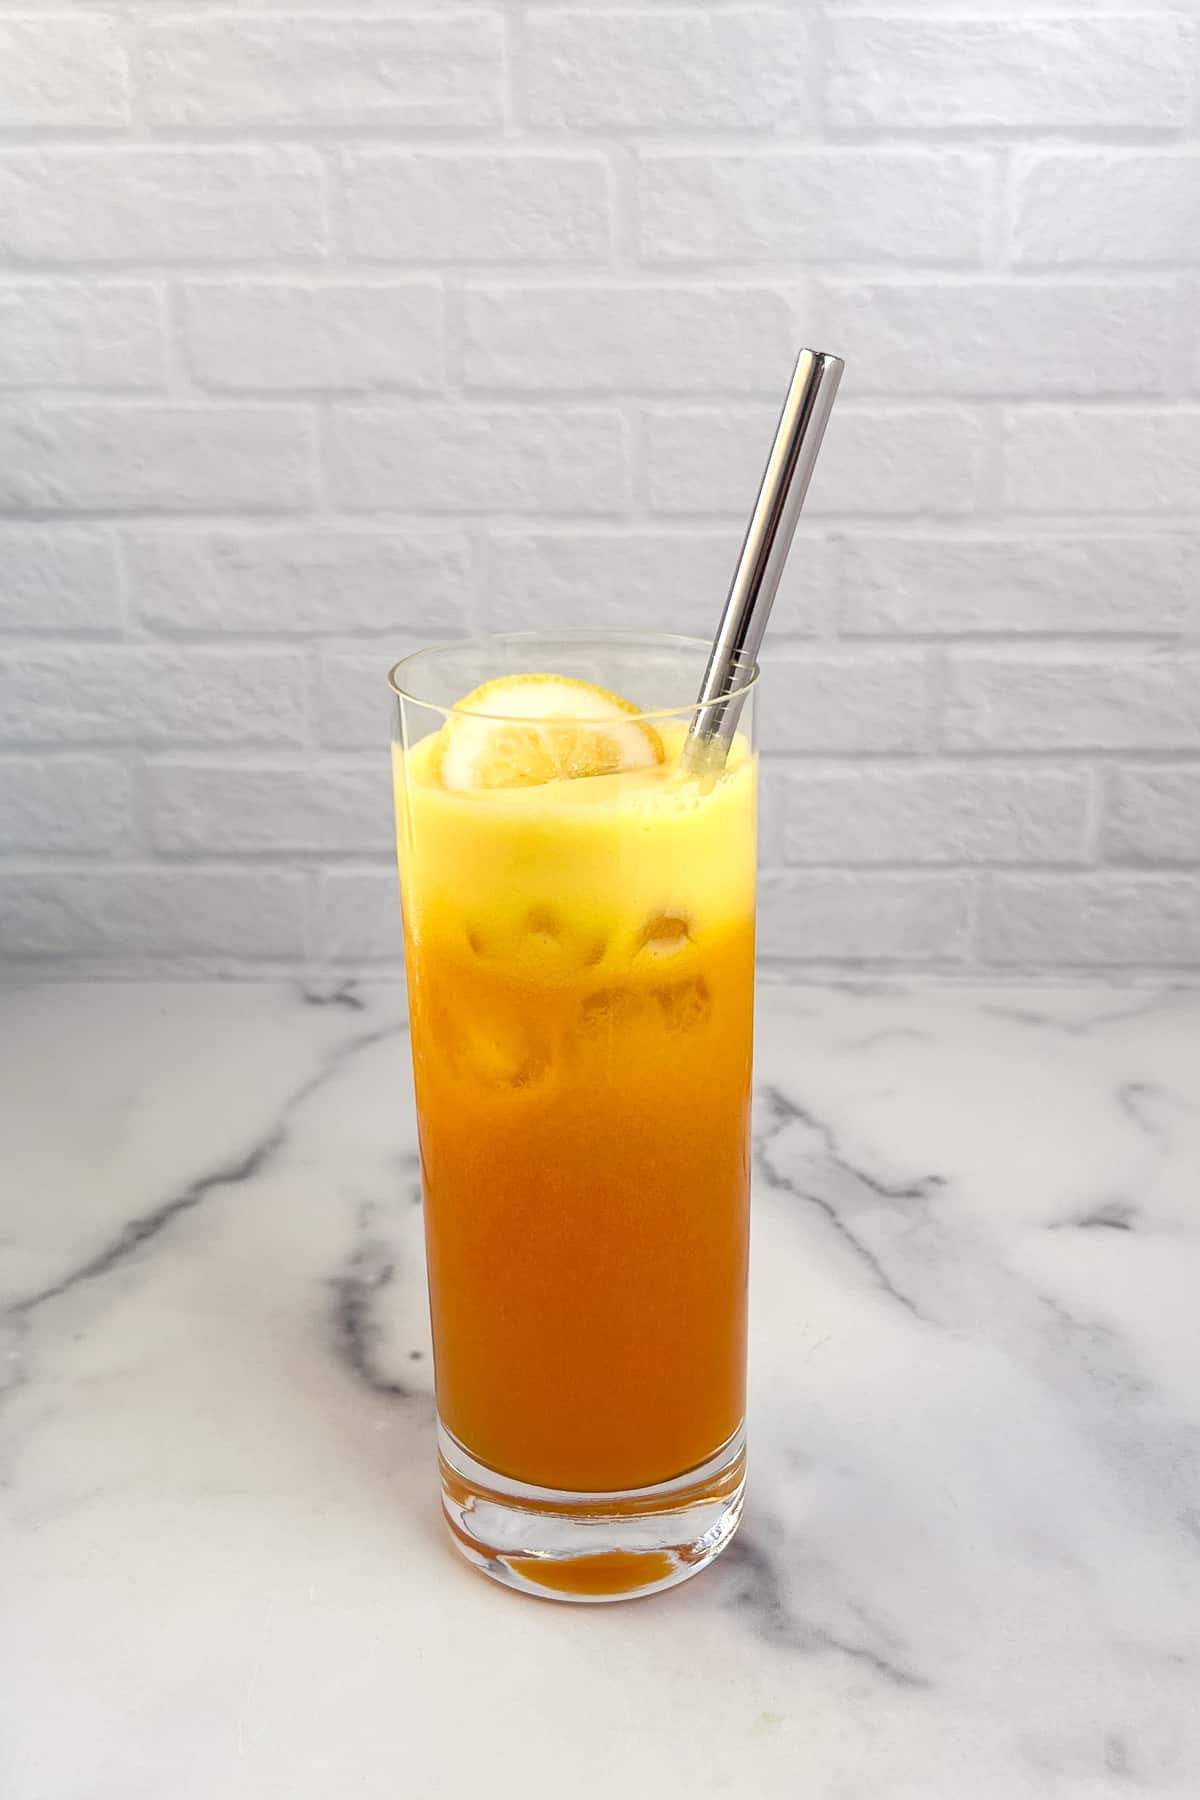 Tall glass of golden beet juice with fresh lemon and a metal straw.